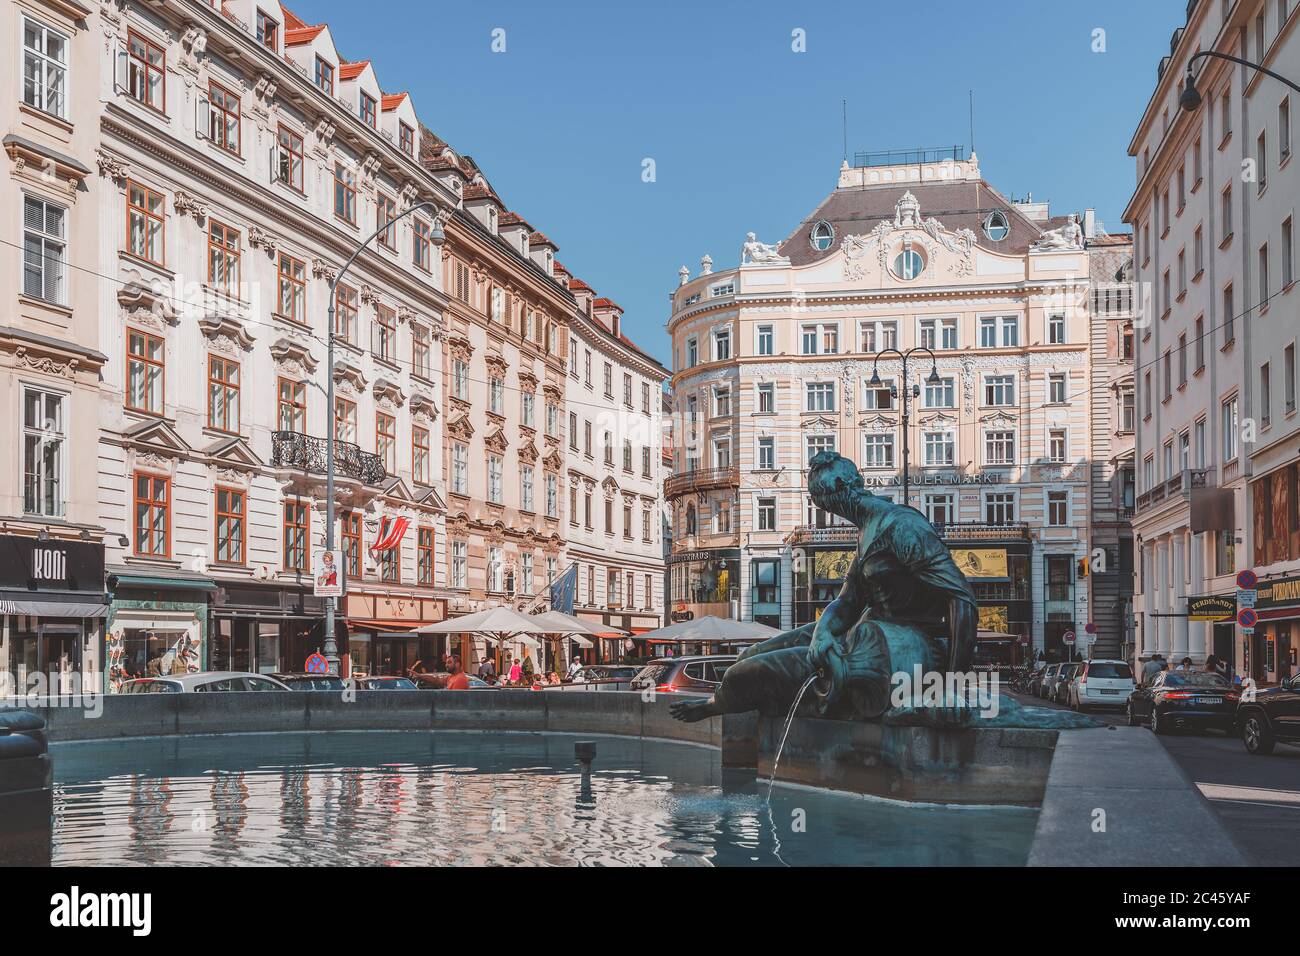 Vienna city scene of typical buildings and fountain in the foreground Stock Photo